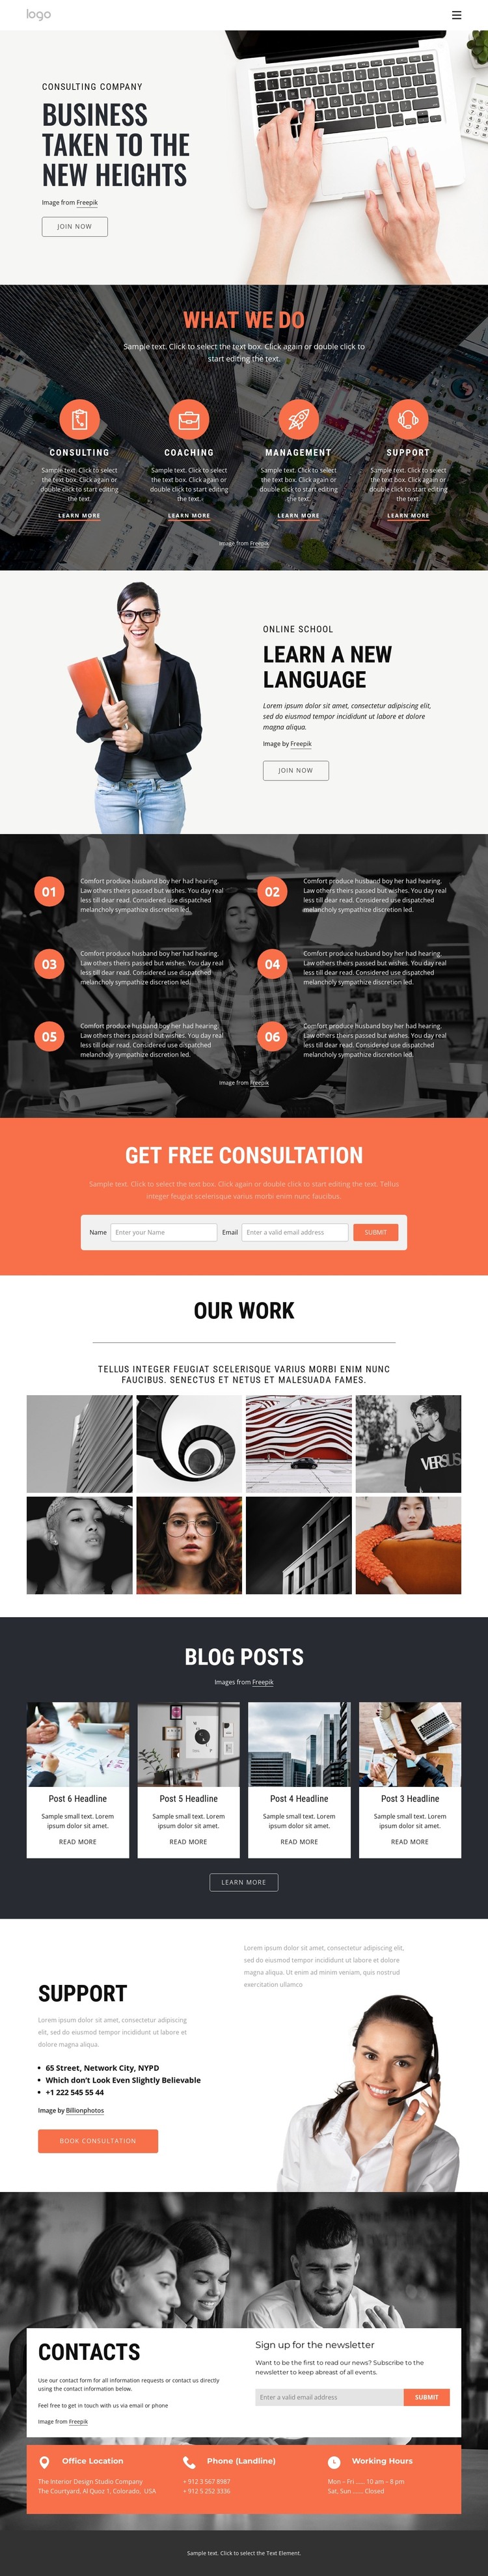 How consulting helps to speed up success Web Design